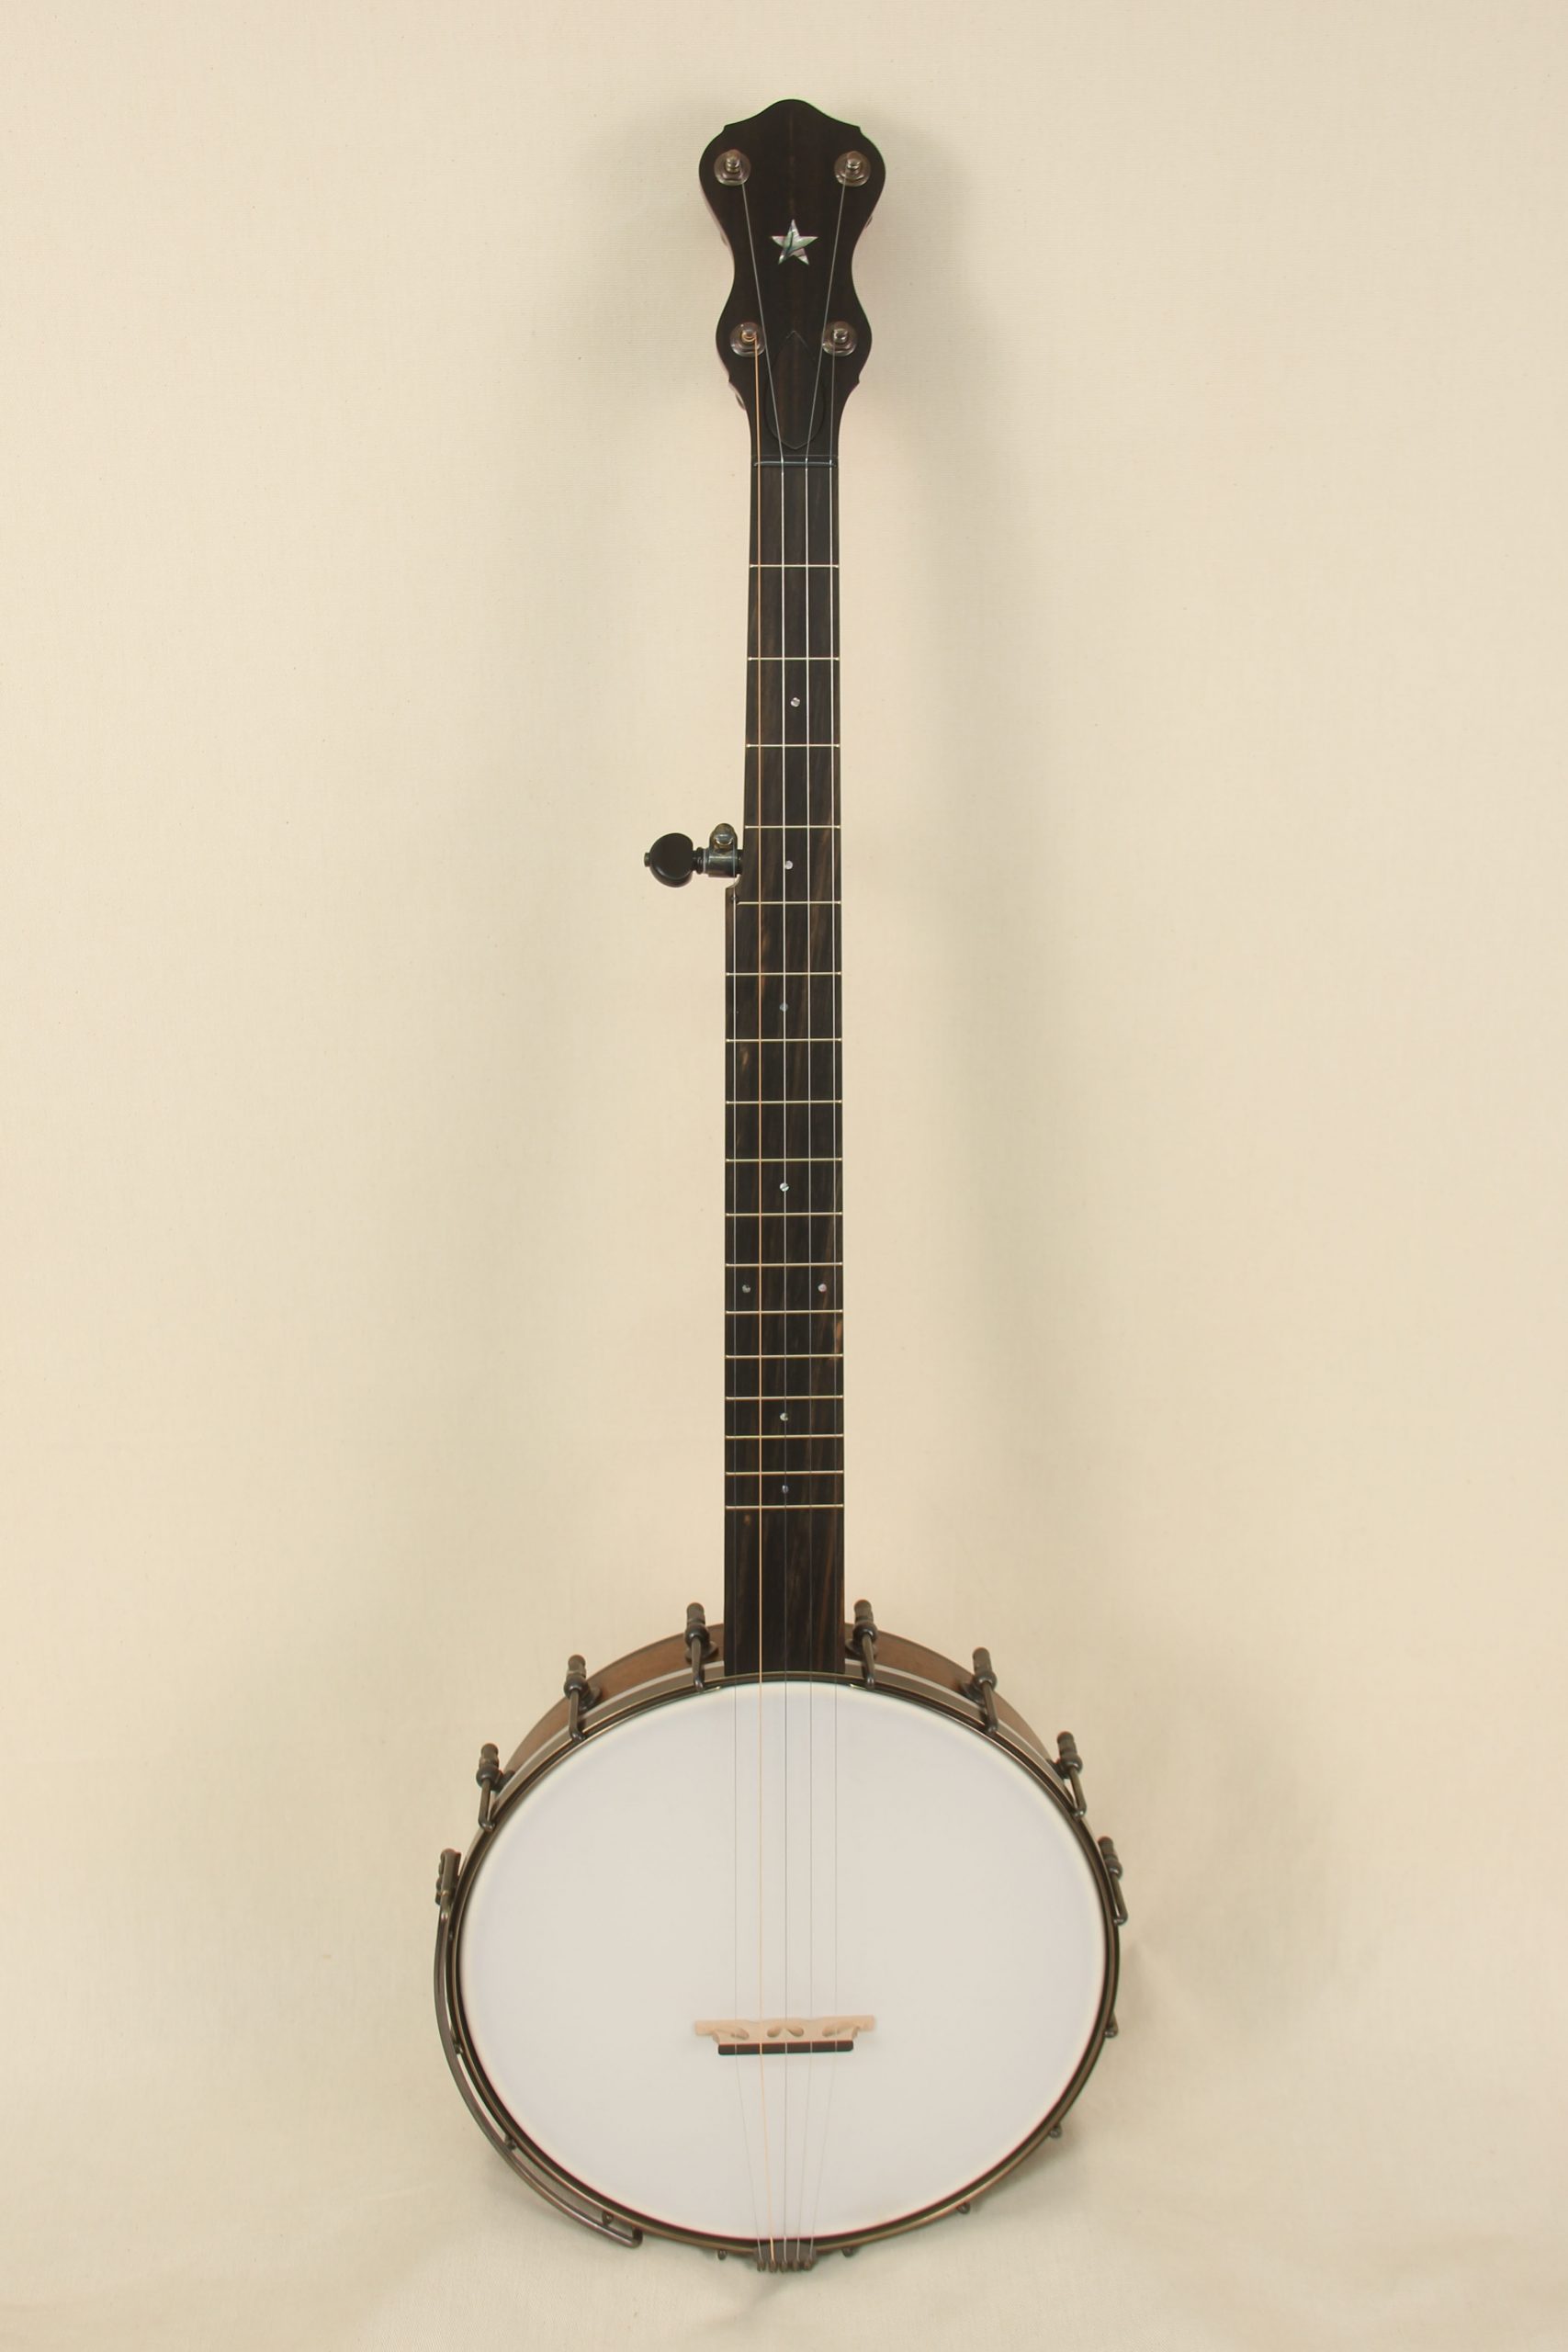 096 - 11inch Walnut Banjo with Rolled Brass Tone Ring-1